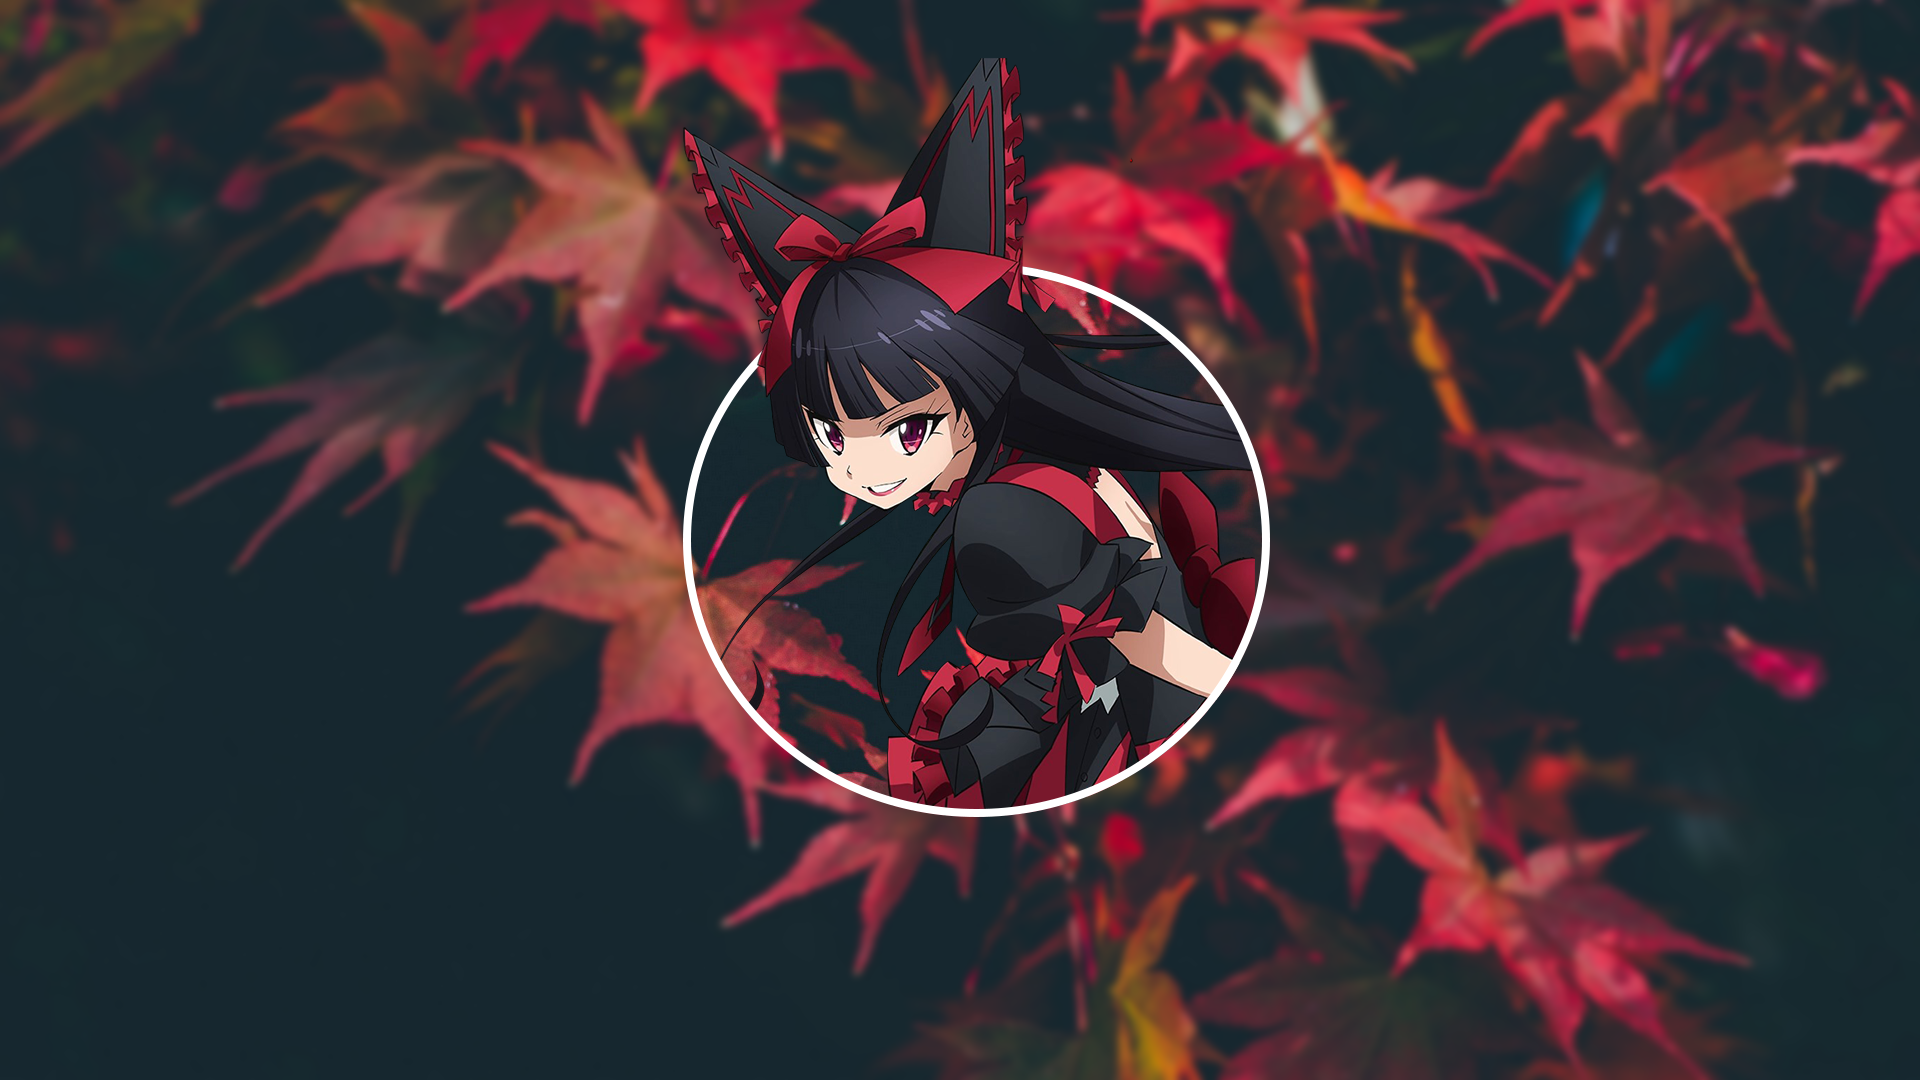 Anime Render In Shapes Anime Girls Dark Eyes Rory Mercury Picture In Picture 1920x1080